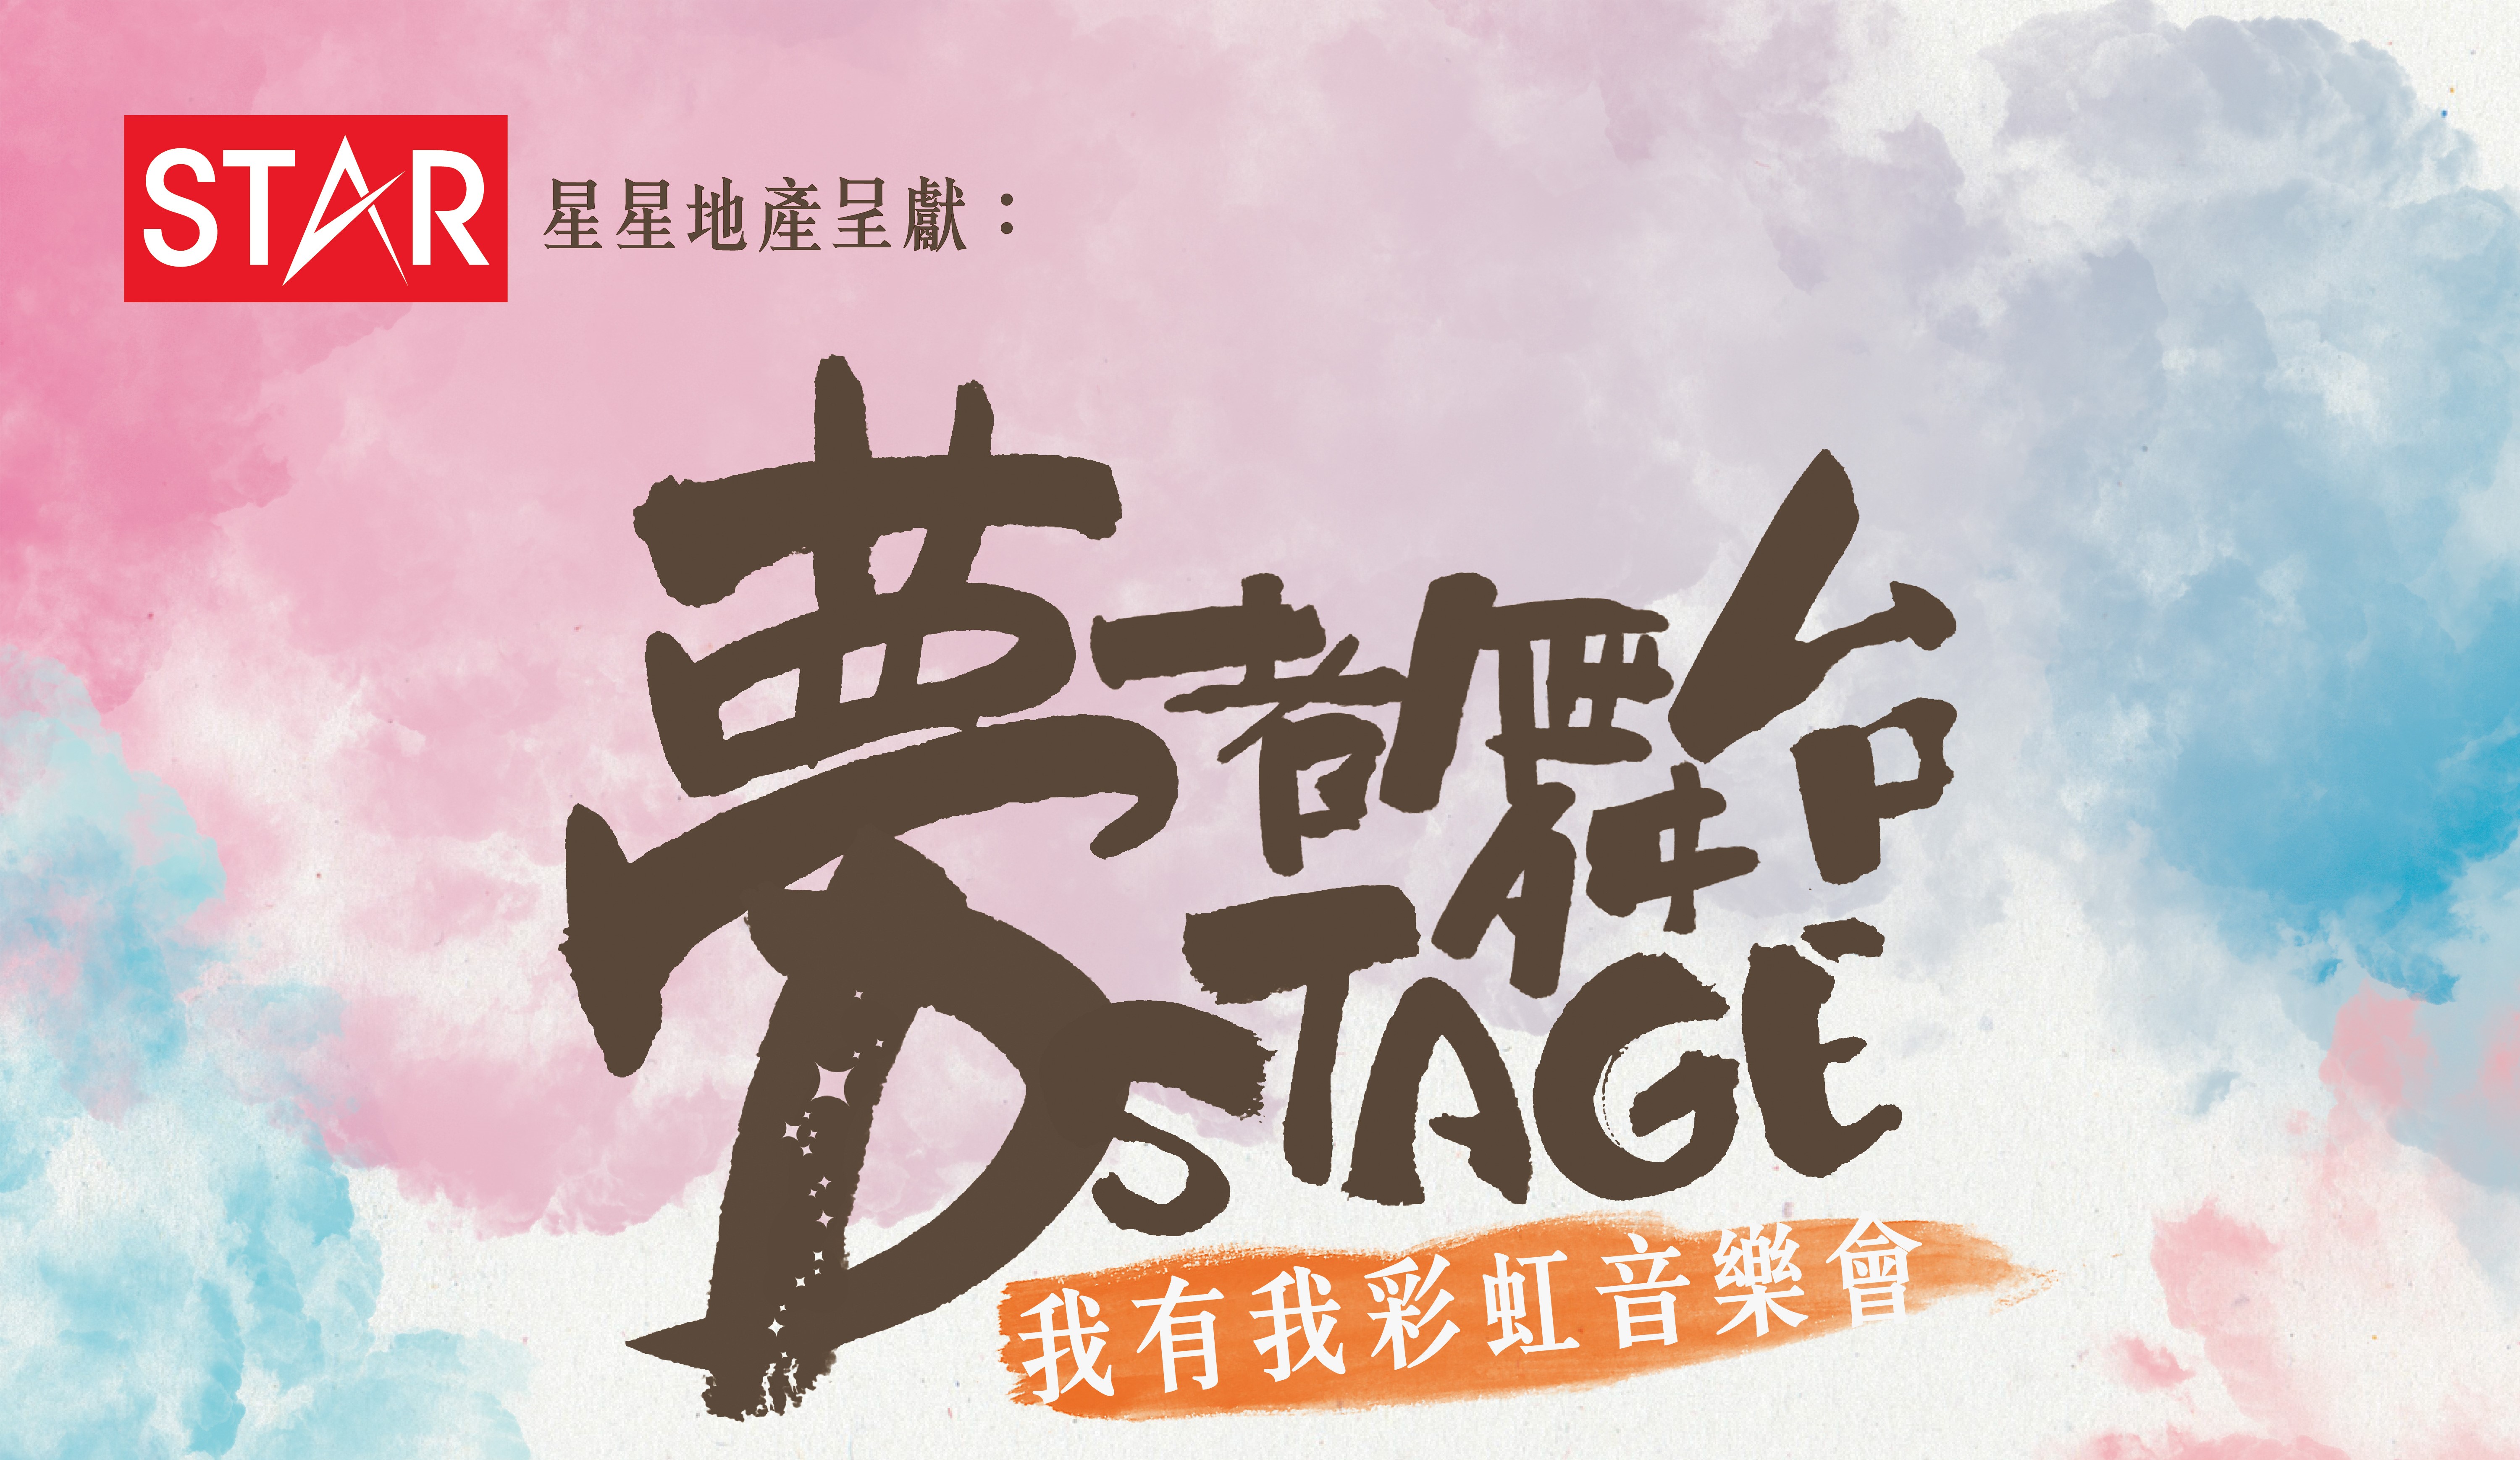 Star Properties Group Named Title Sponsor for Non-Profit Concert in Hong Kong